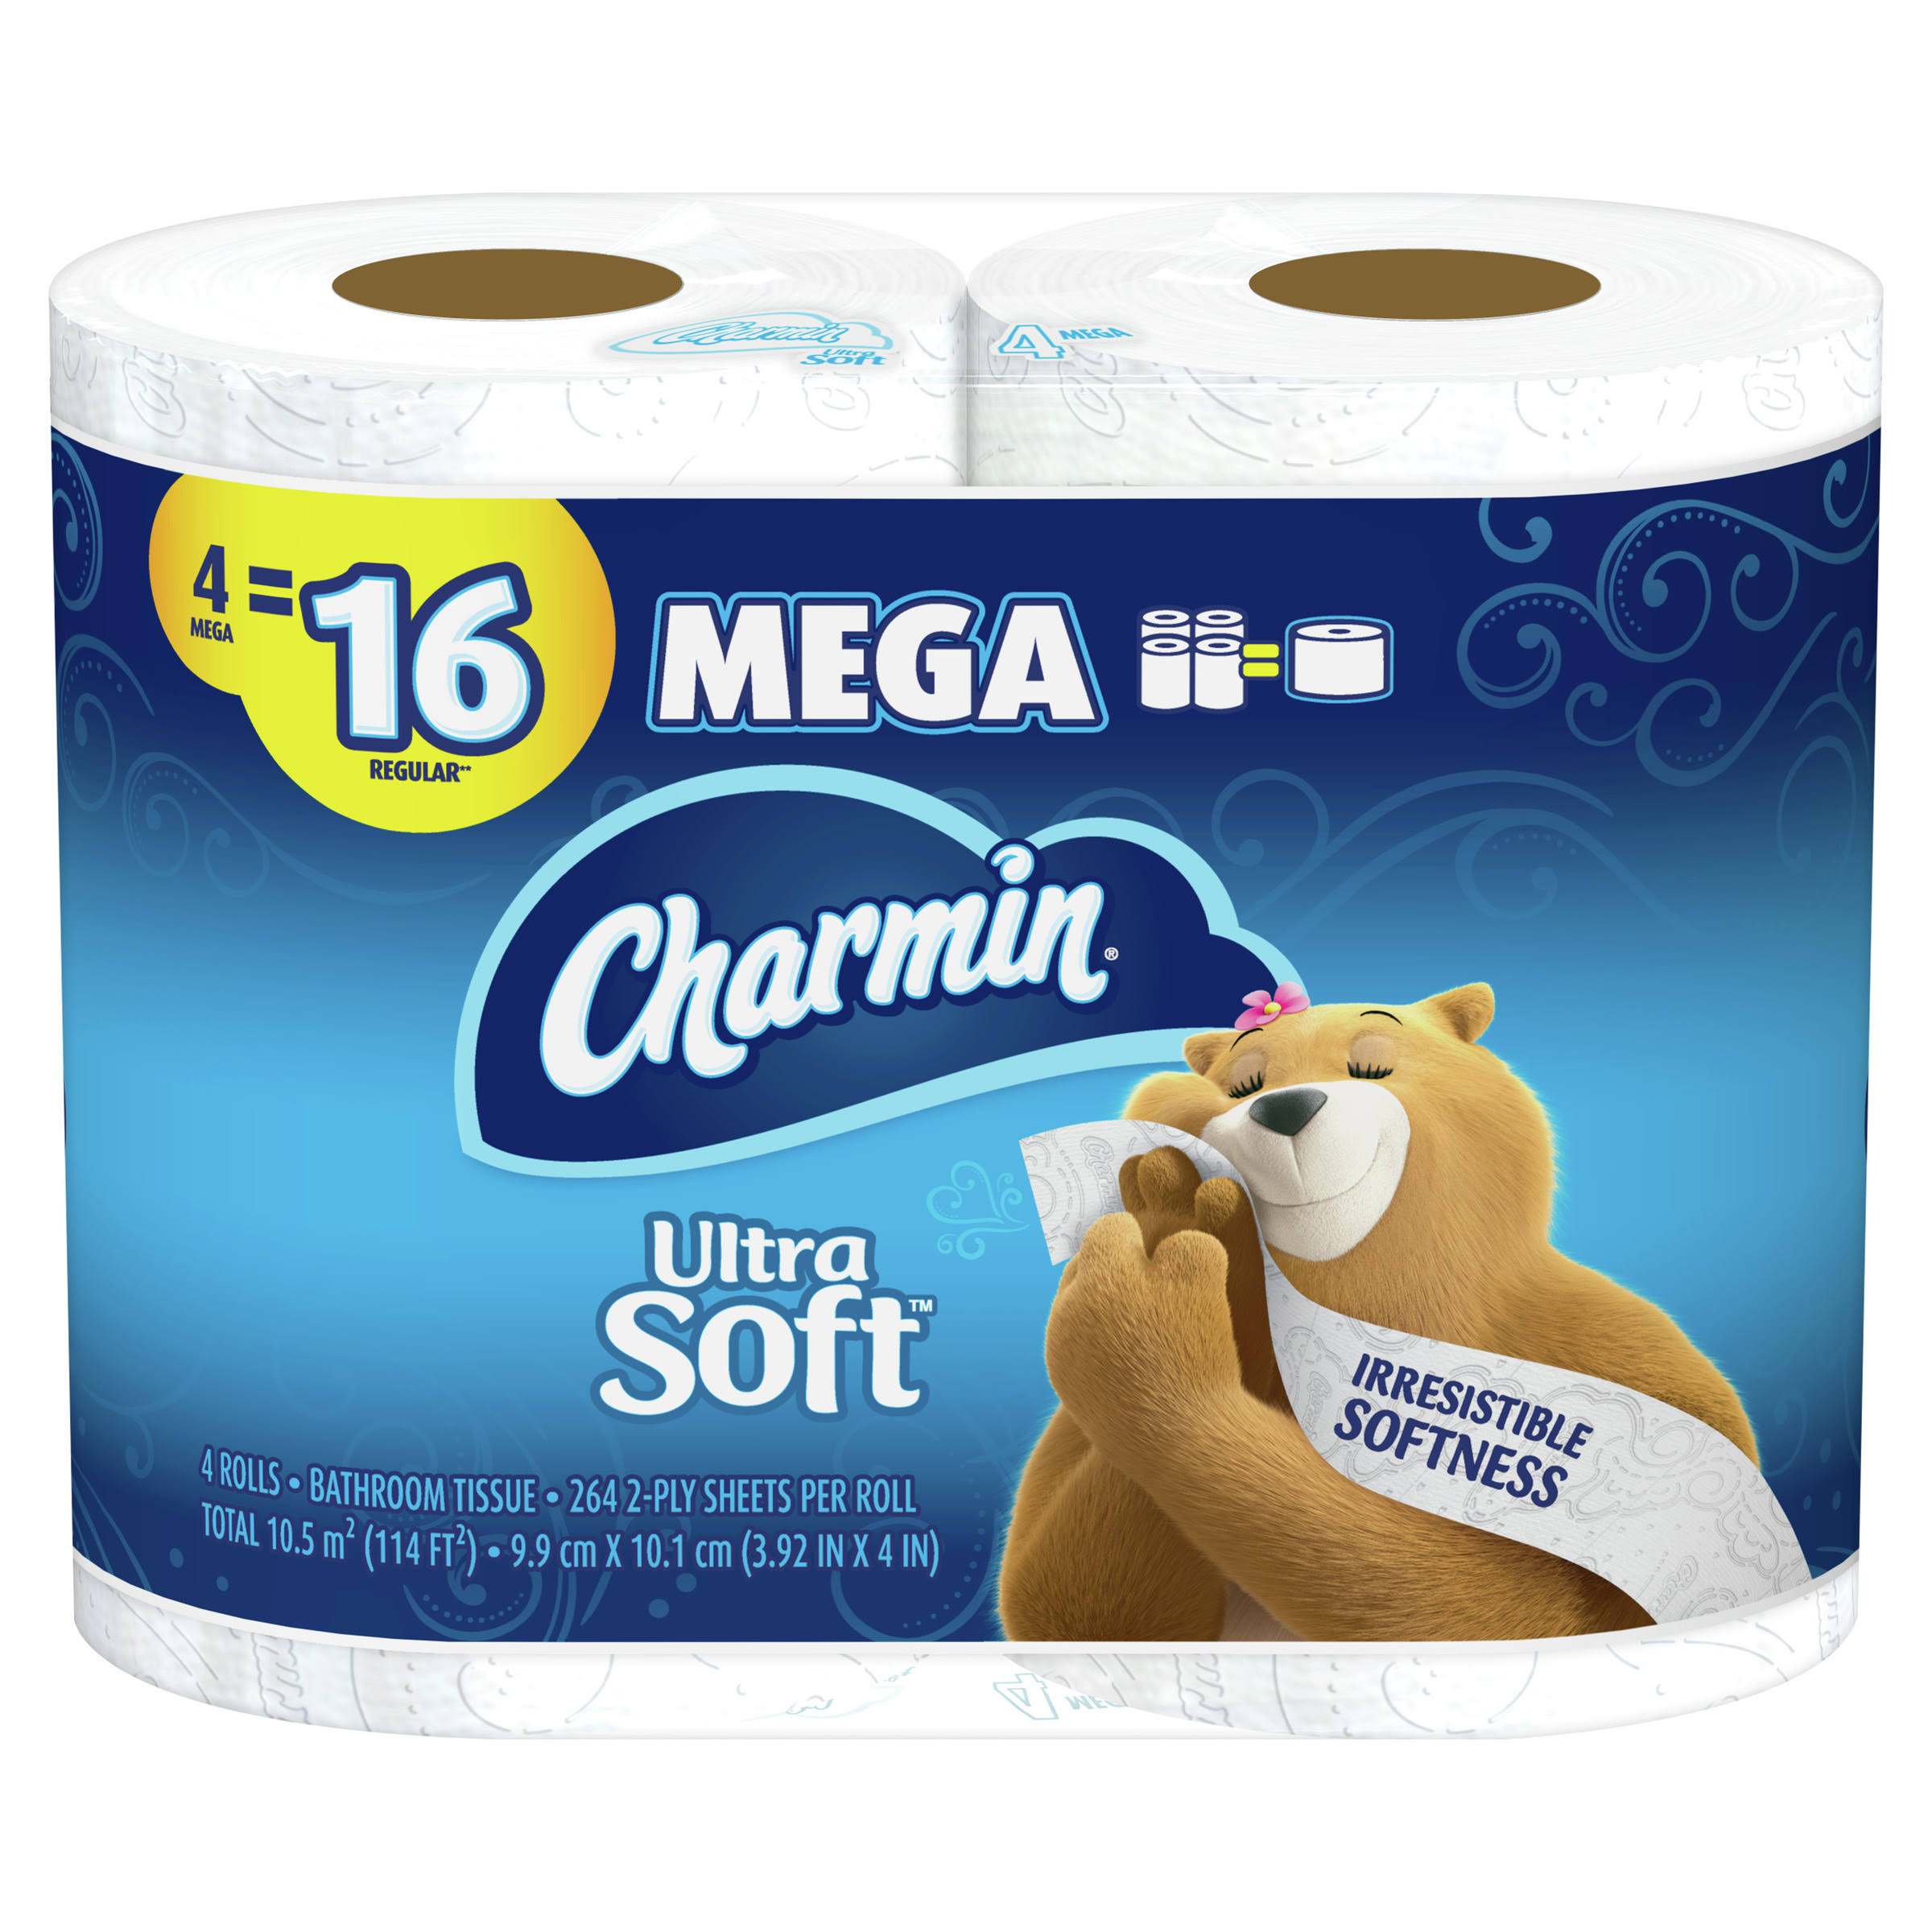 Charmin Ultra Soft Bathroom Tissue, Septic Safe, 2-Ply, White, 4 x 3.92, 264 Sheets/Roll, 4 Rolls/Pack